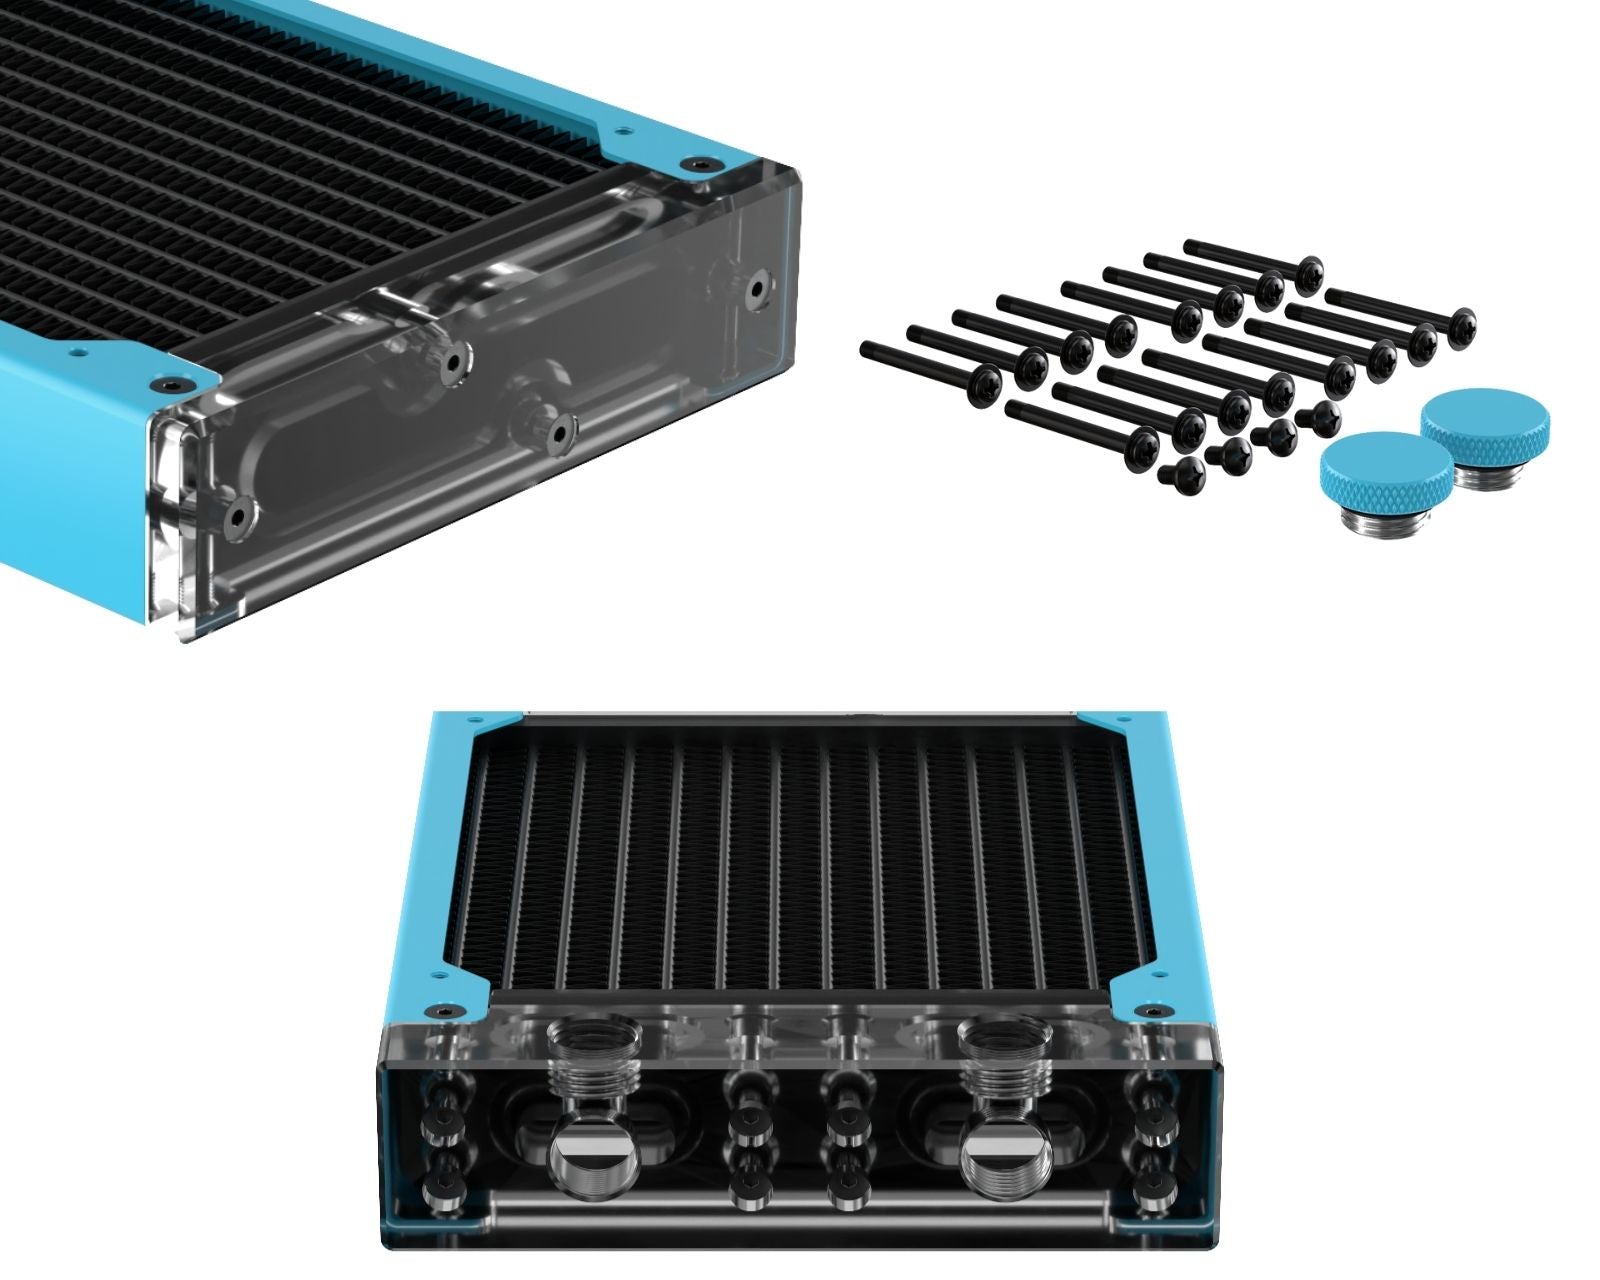 PrimoChill 480SL (30mm) EXIMO Modular Radiator, Clear Acrylic, 4x120mm, Quad Fan (R-SL-A48) Available in 20+ Colors, Assembled in USA and Custom Watercooling Loop Ready - Sky Blue